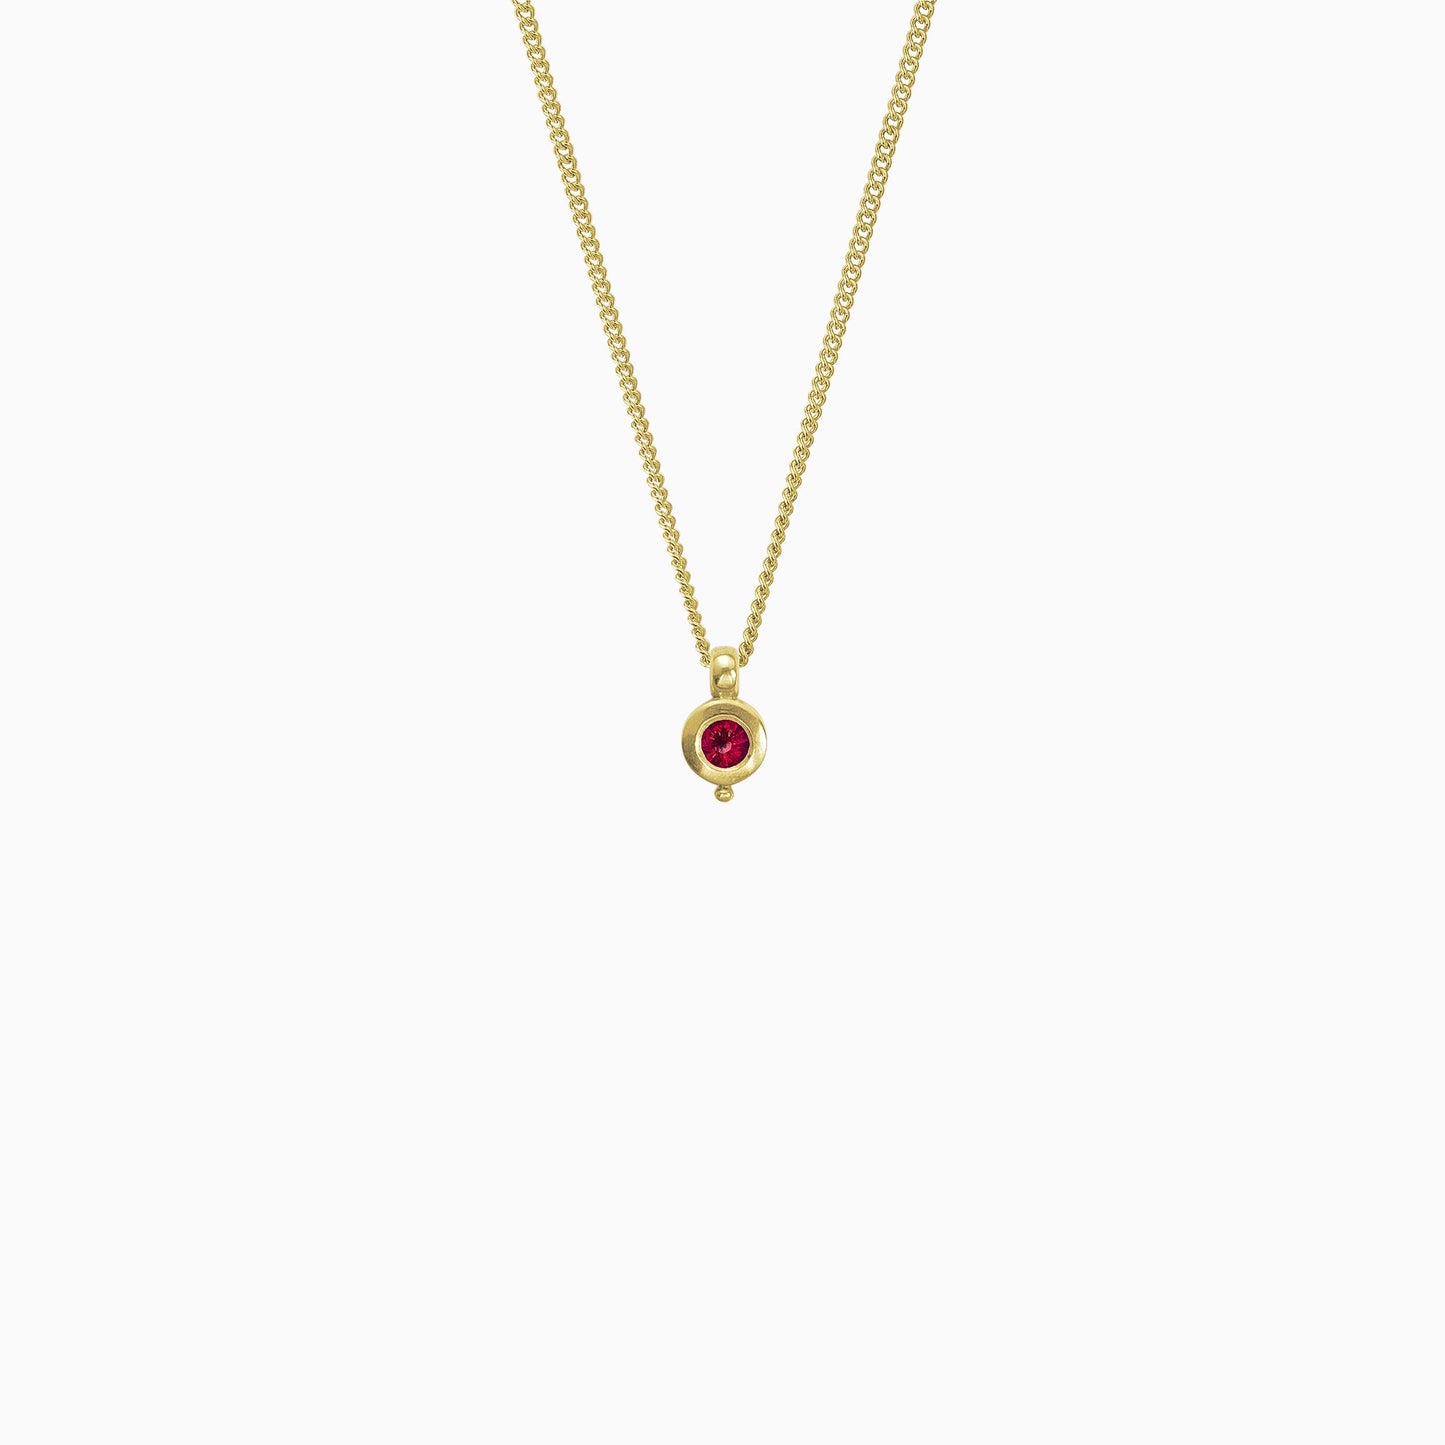 18ct Fairtrade yellow gold round pendant 12mm  x 7mm with small round bead attached below on a 45cm fine curb chain. Set with a 4mm round ruby.